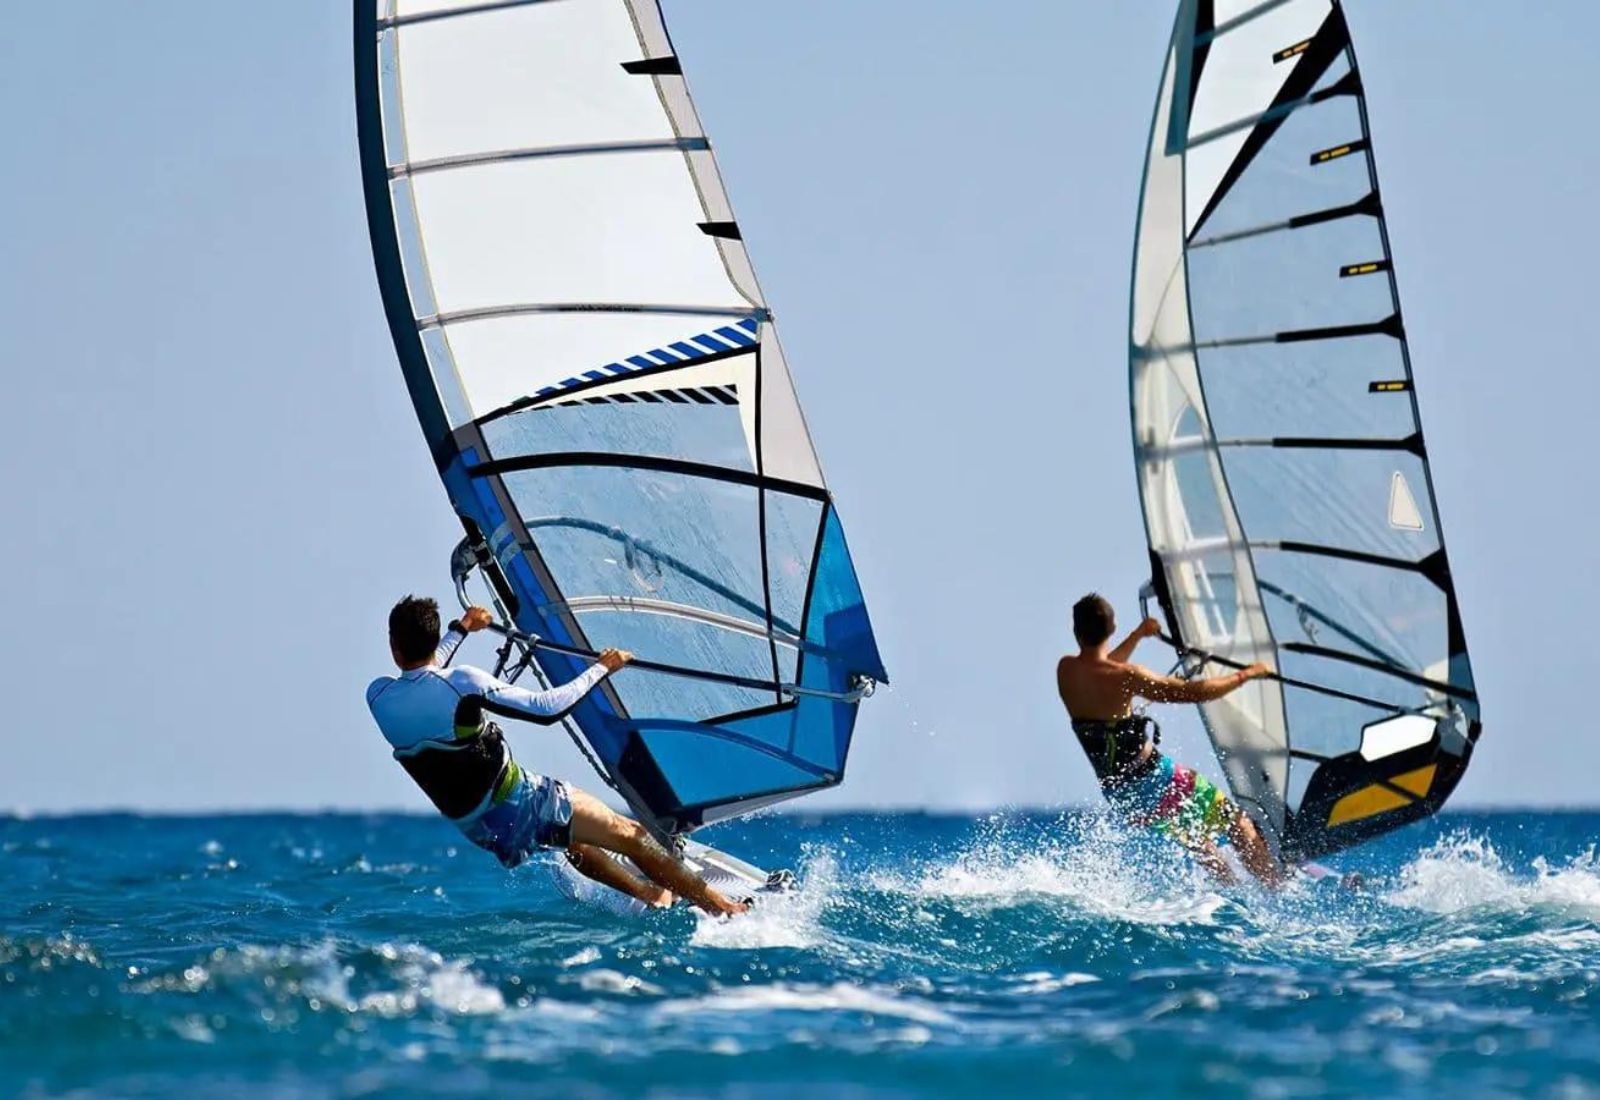 Sport and adventure in Sicily: exciting experiences in close contact with nature